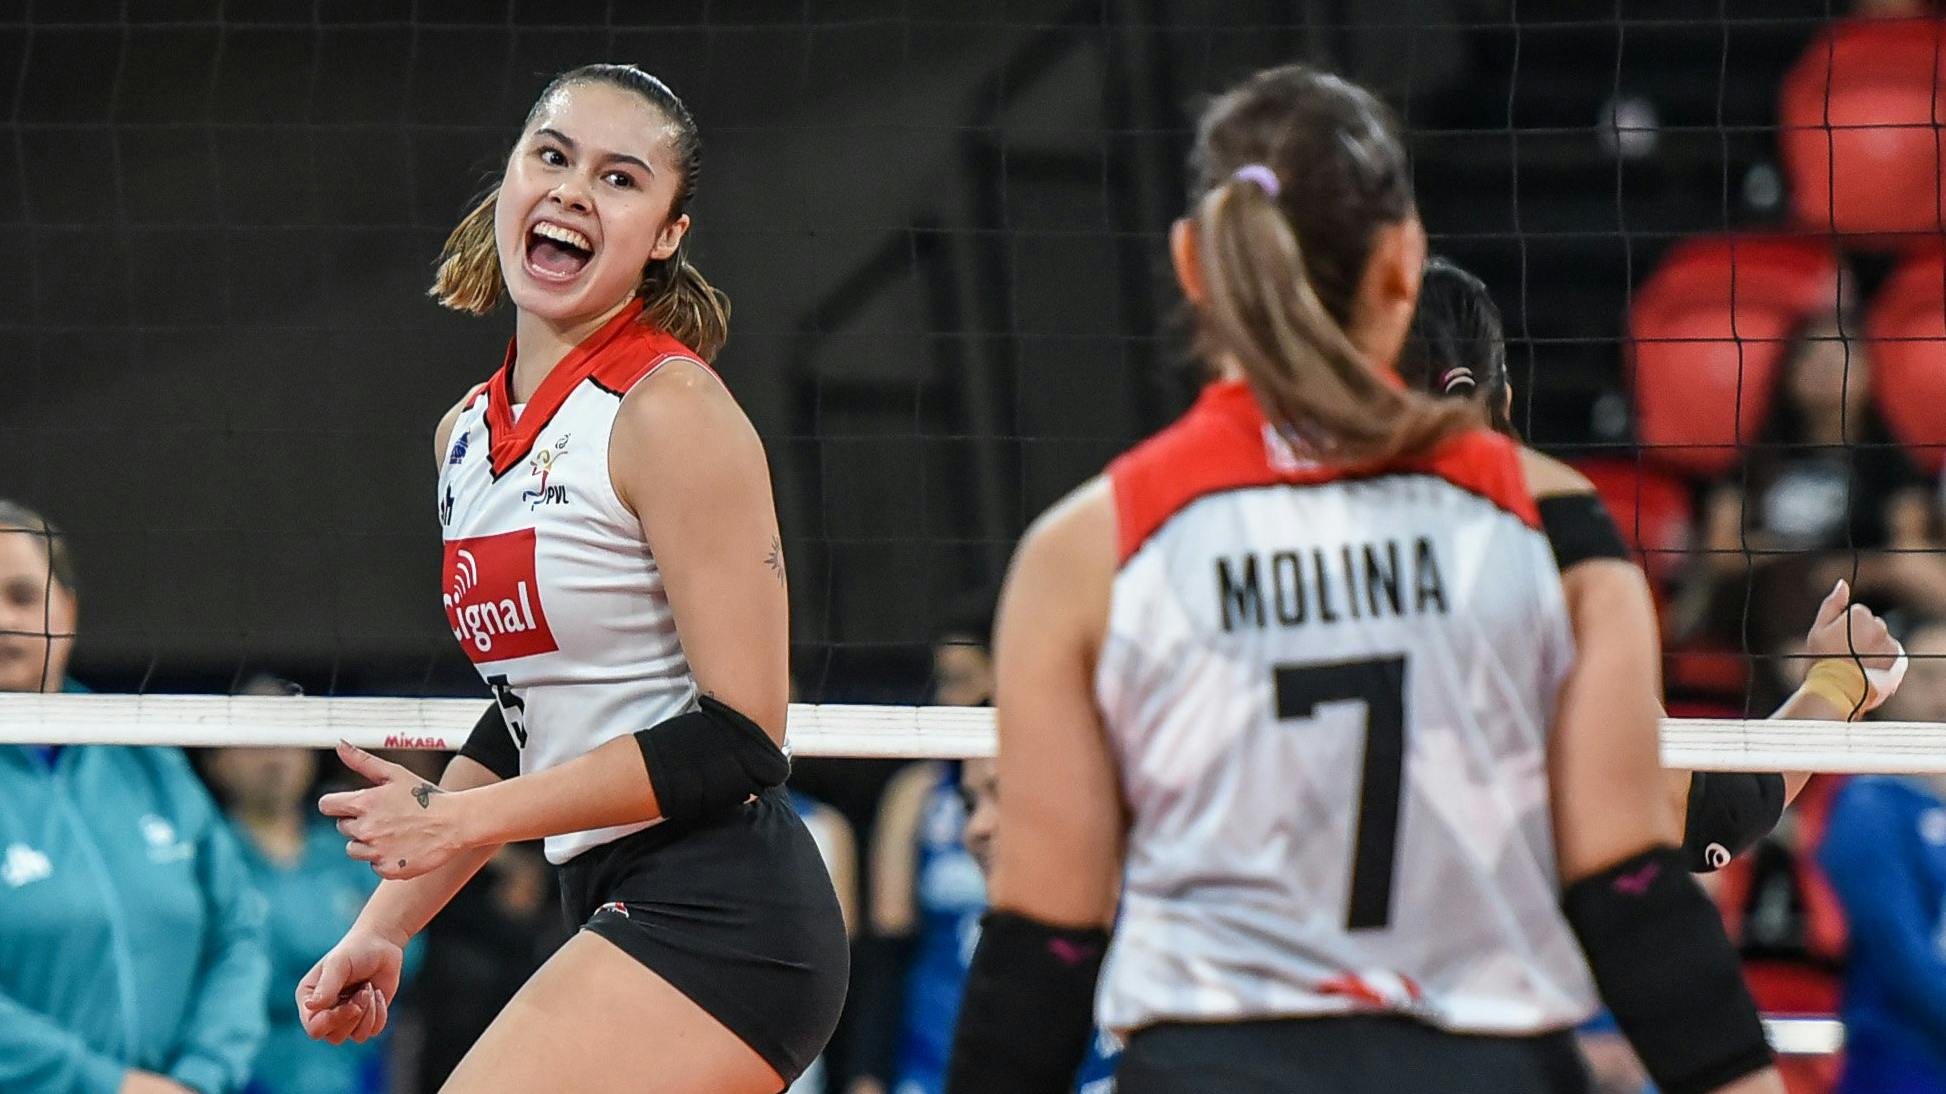 Vanie Gandler has inspiring message to her college self as Cignal takes down Galeries